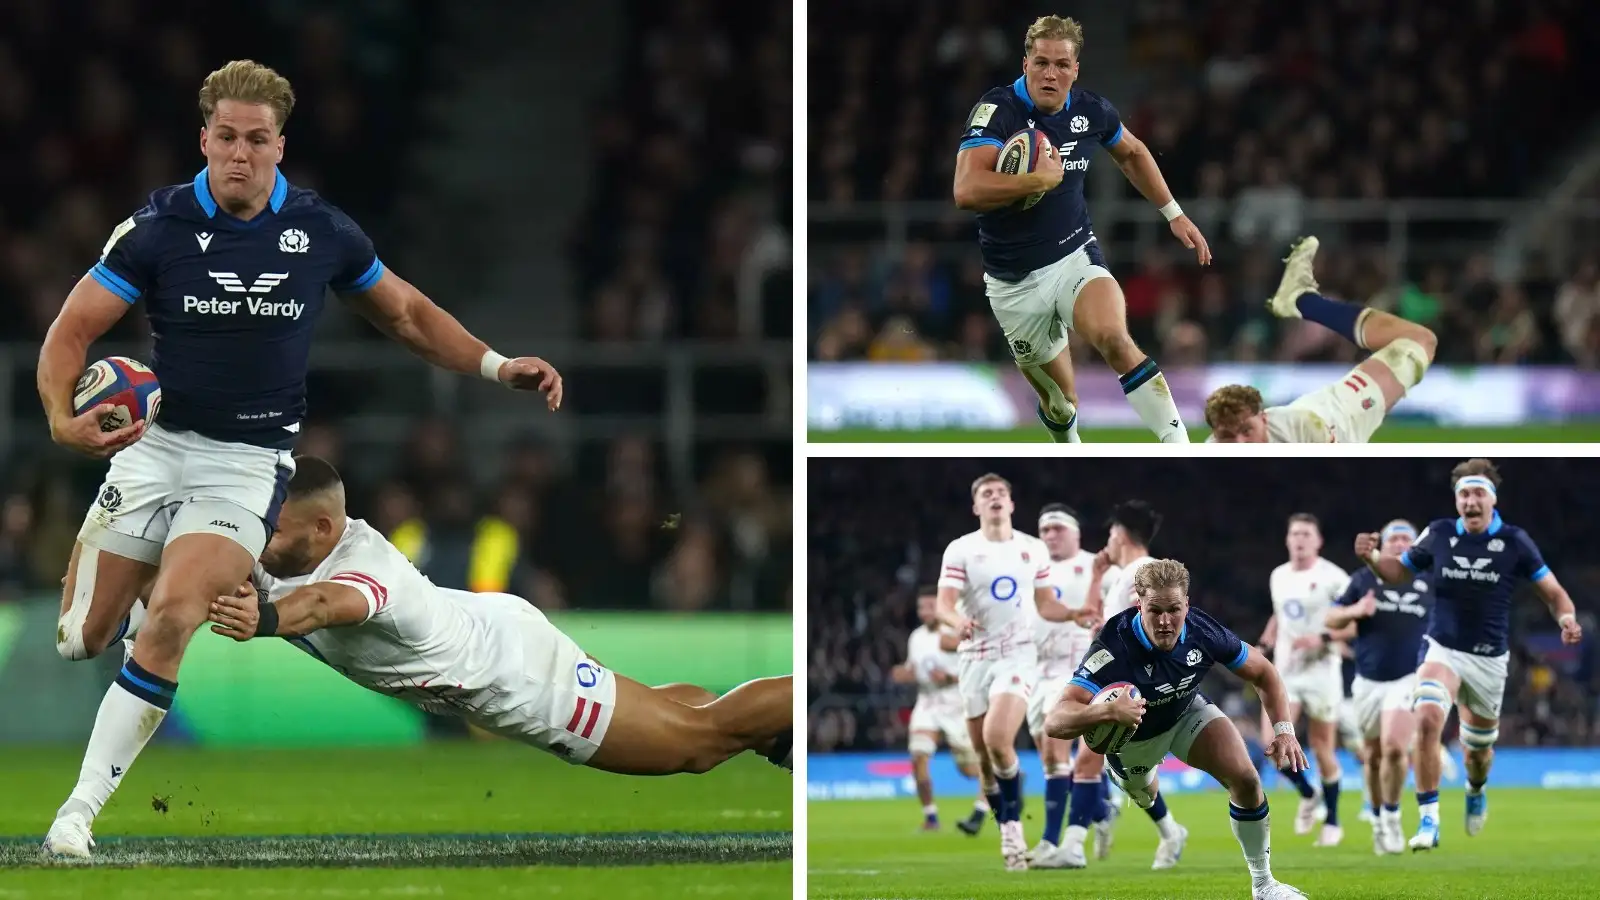 Scotland winger Duhan van der Merwe has scored one of the greatest Six Nations tries of all time against England at Twickenham. Gregor Townsend's side charged into the lead in the 15th minute, with Huw Jones scoring the first try off a neat grubber from Finn Russell. Jones scoring his fifth try in as many matches against England.